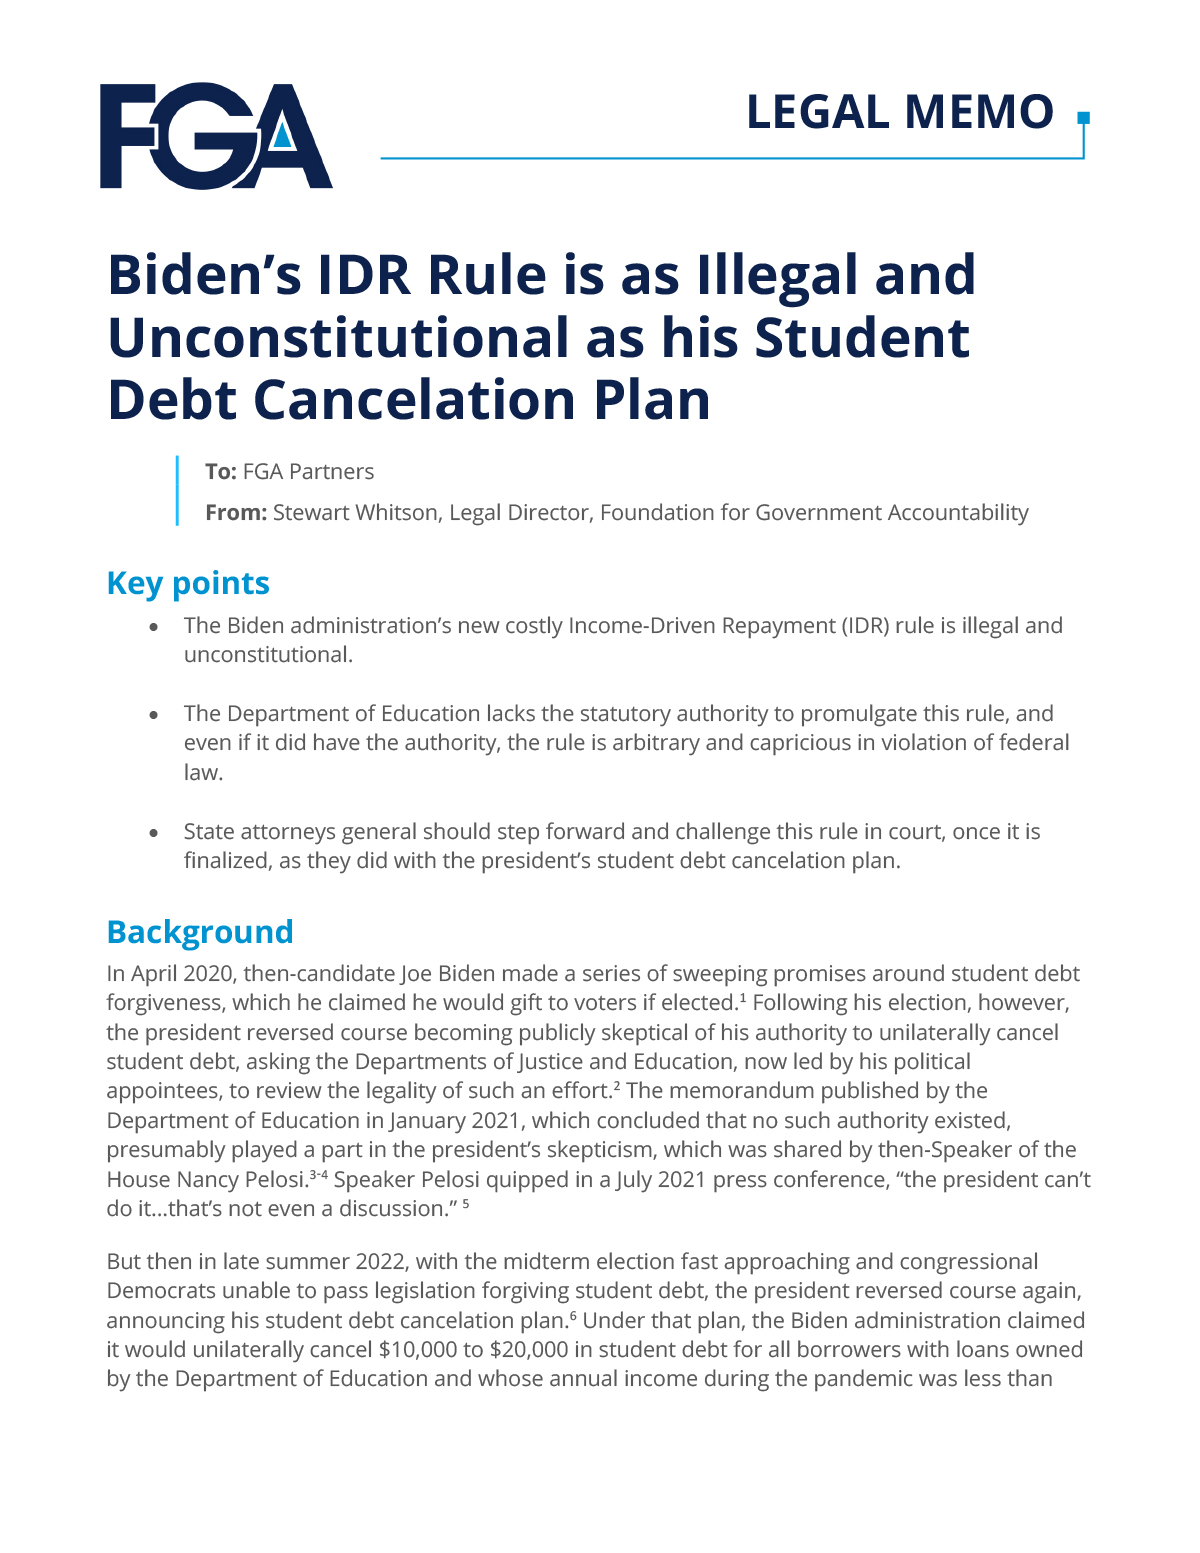 Biden’s IDR Rule is as Illegal and Unconstitutional as his Student Debt Cancelation Plan